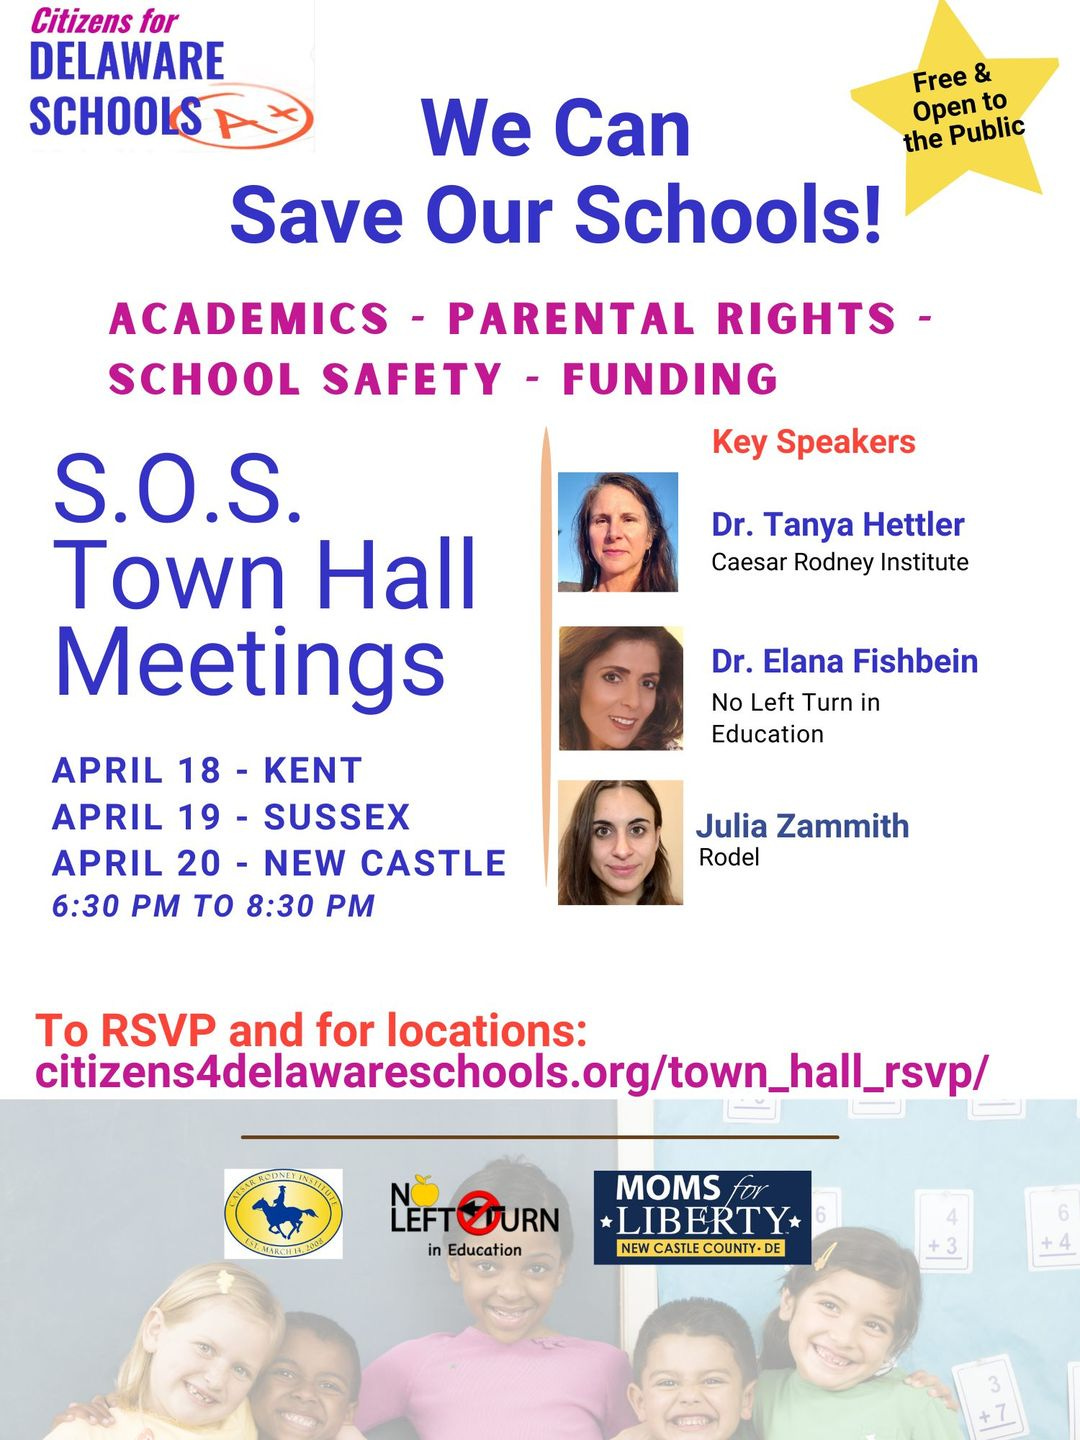 May be an image of 8 people and text that says 'Citizens for DELAWARE SCHOOLS Free & We Can Open to the Public Save Our Schools! ACADEMICS PARENTAL RIGHTS SCHOOL SAFETY FUNDING Key Speakers Dr. Tanya Hettler Caesar Rodney Institute Dr. Elana Fishbein No Left Turn in Education S.O.S. Town Hall Meetings APRIL 18 KENT APRIL 19- SUSSEX APRIL 20- NEW CASTLE 6:30 PM To 8:30 PM Julia Zammith Rodel To RSVP and for locations: citzes4de.o/oha_p/ S-MARCH LEFTOURN JURN Education MOMS *LIBERTY* DE COUNTY.DE'